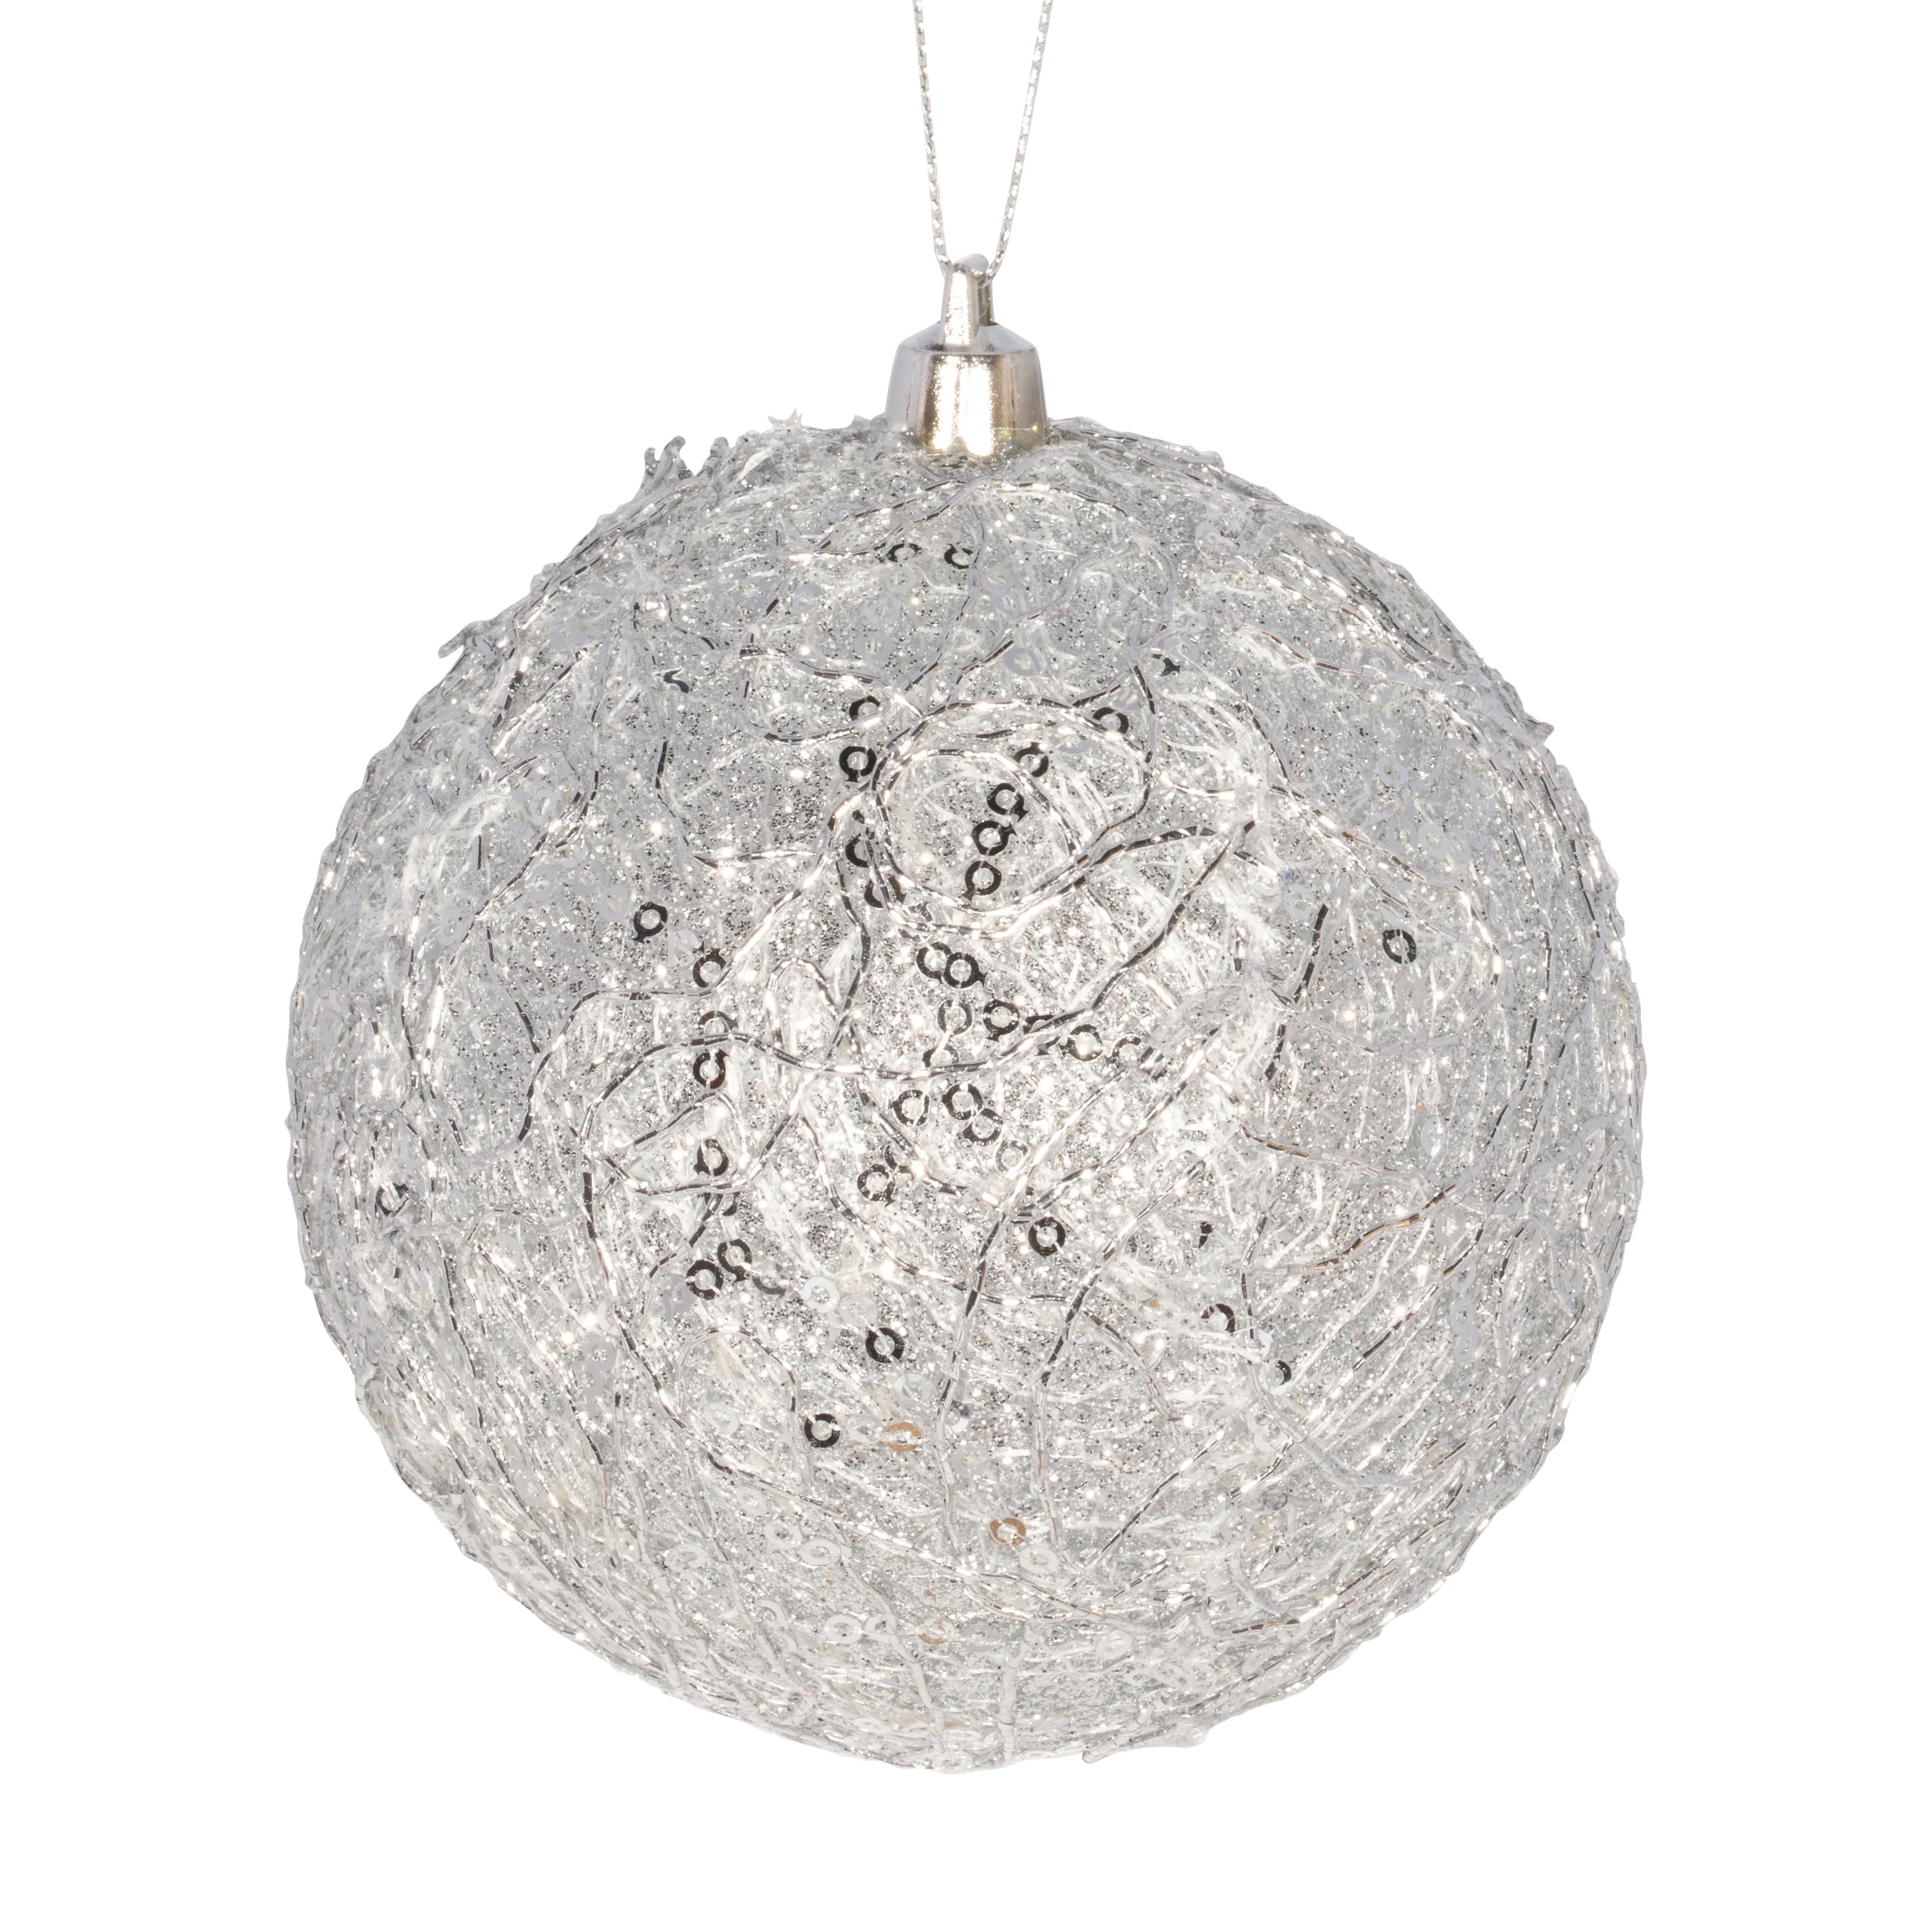 48 x Christmas Silver Glitter Sequin Bauble Hanging  Decoration - Silver